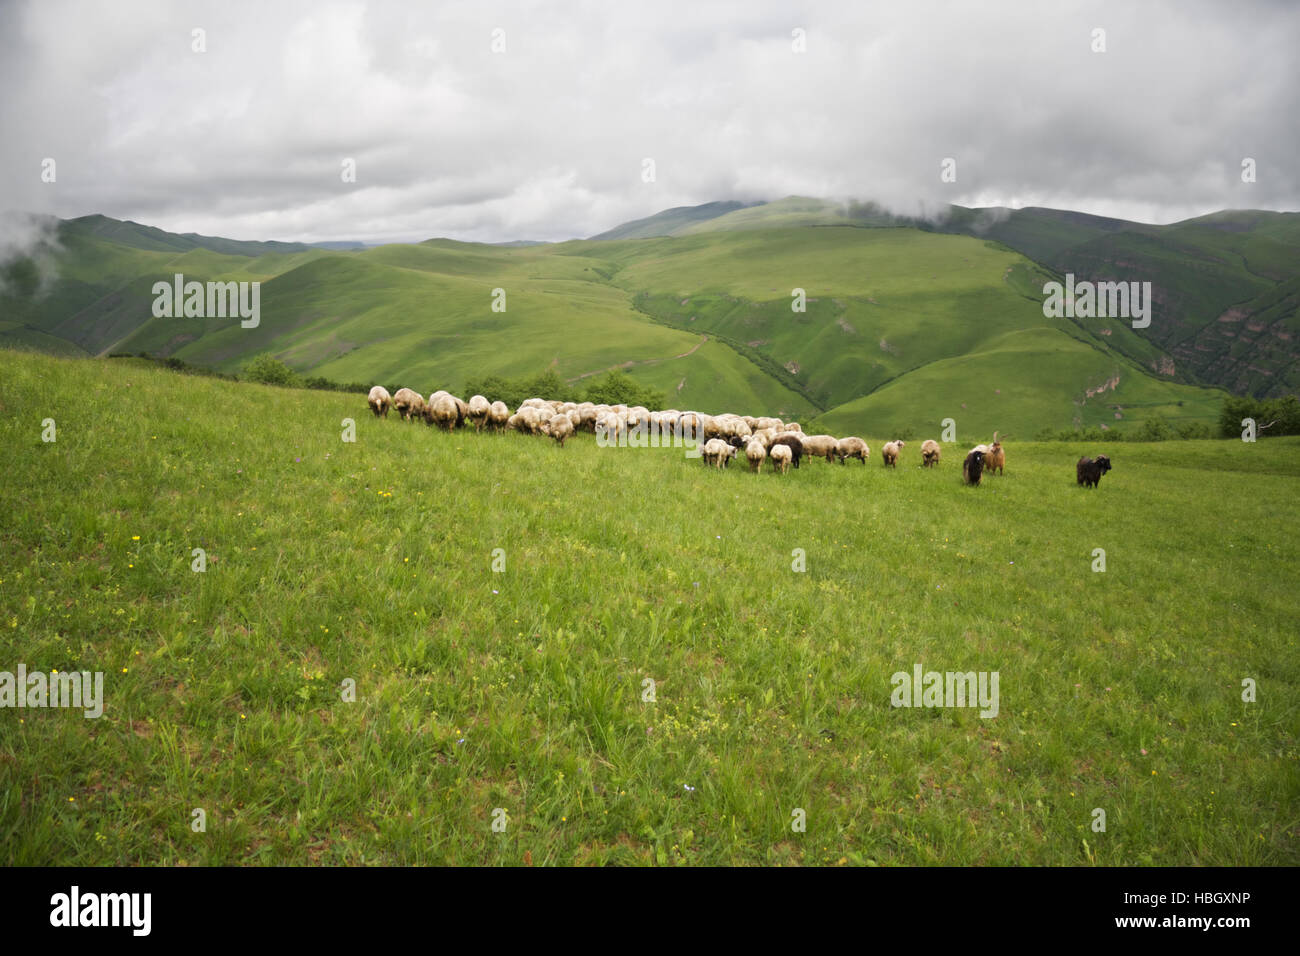 Sheeps in a cloudy meadows Stock Photo